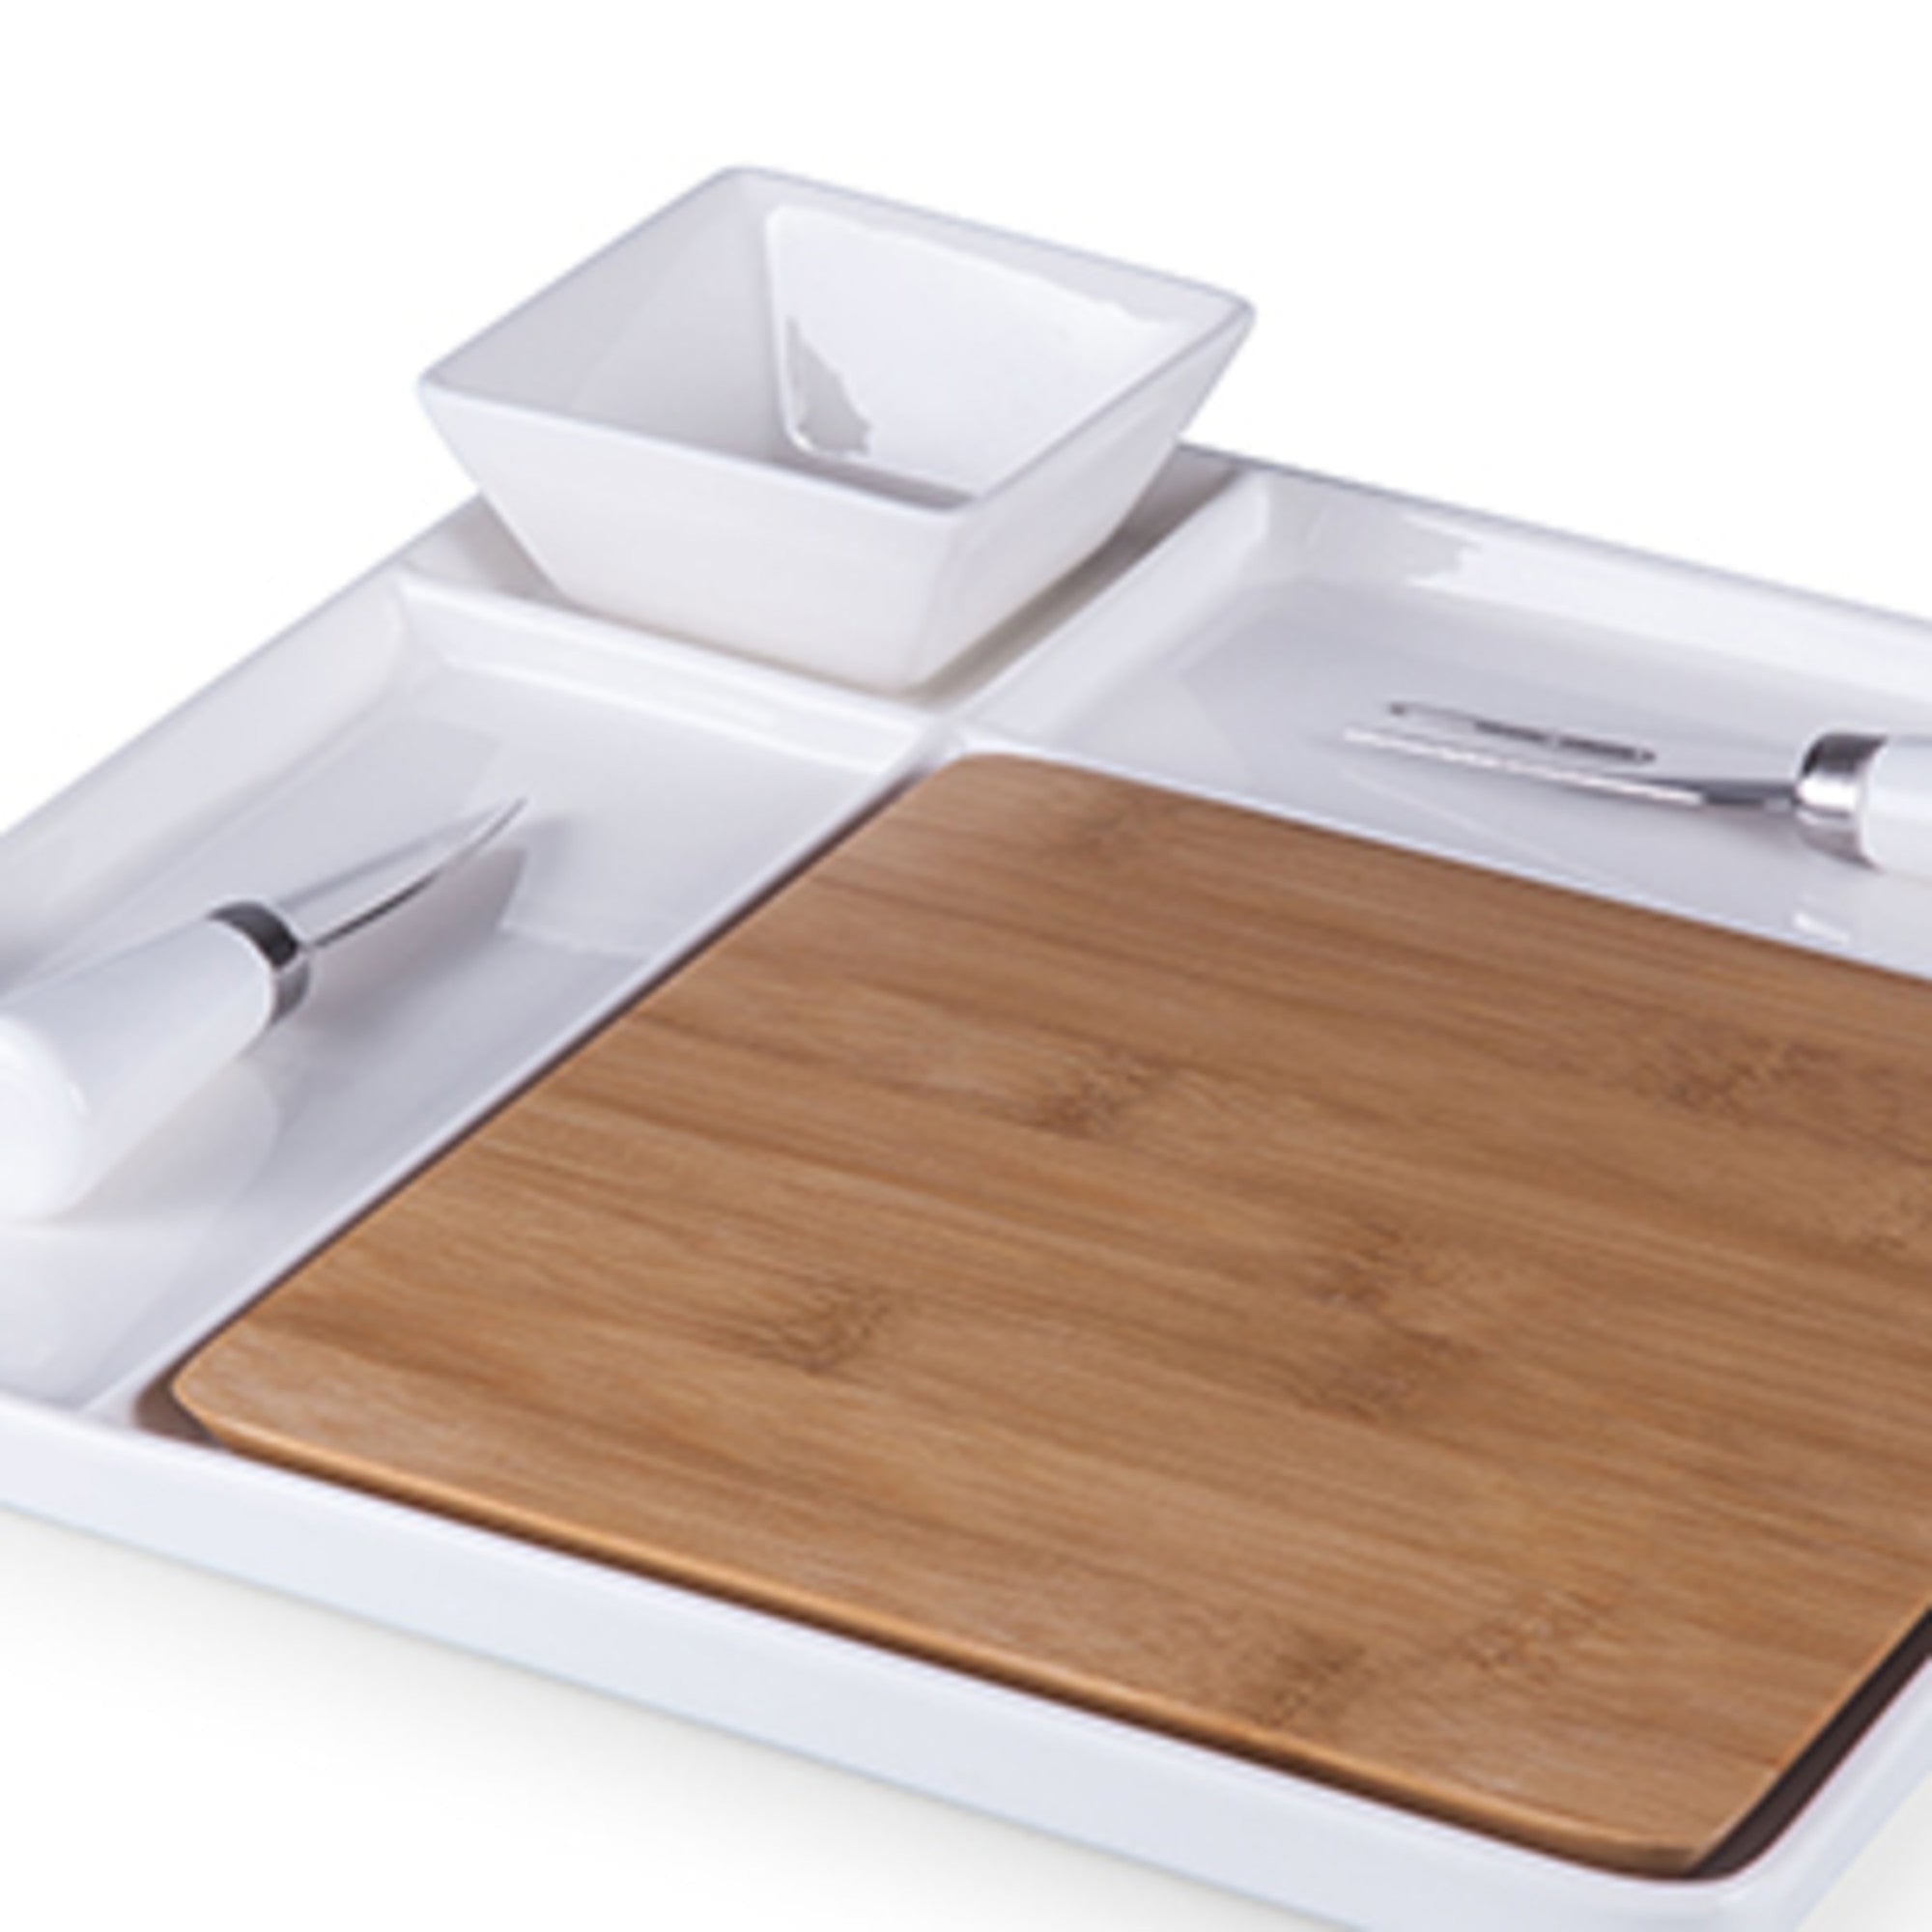 3-Piece Two-Tone Bamboo Serving and Cutting Board Set